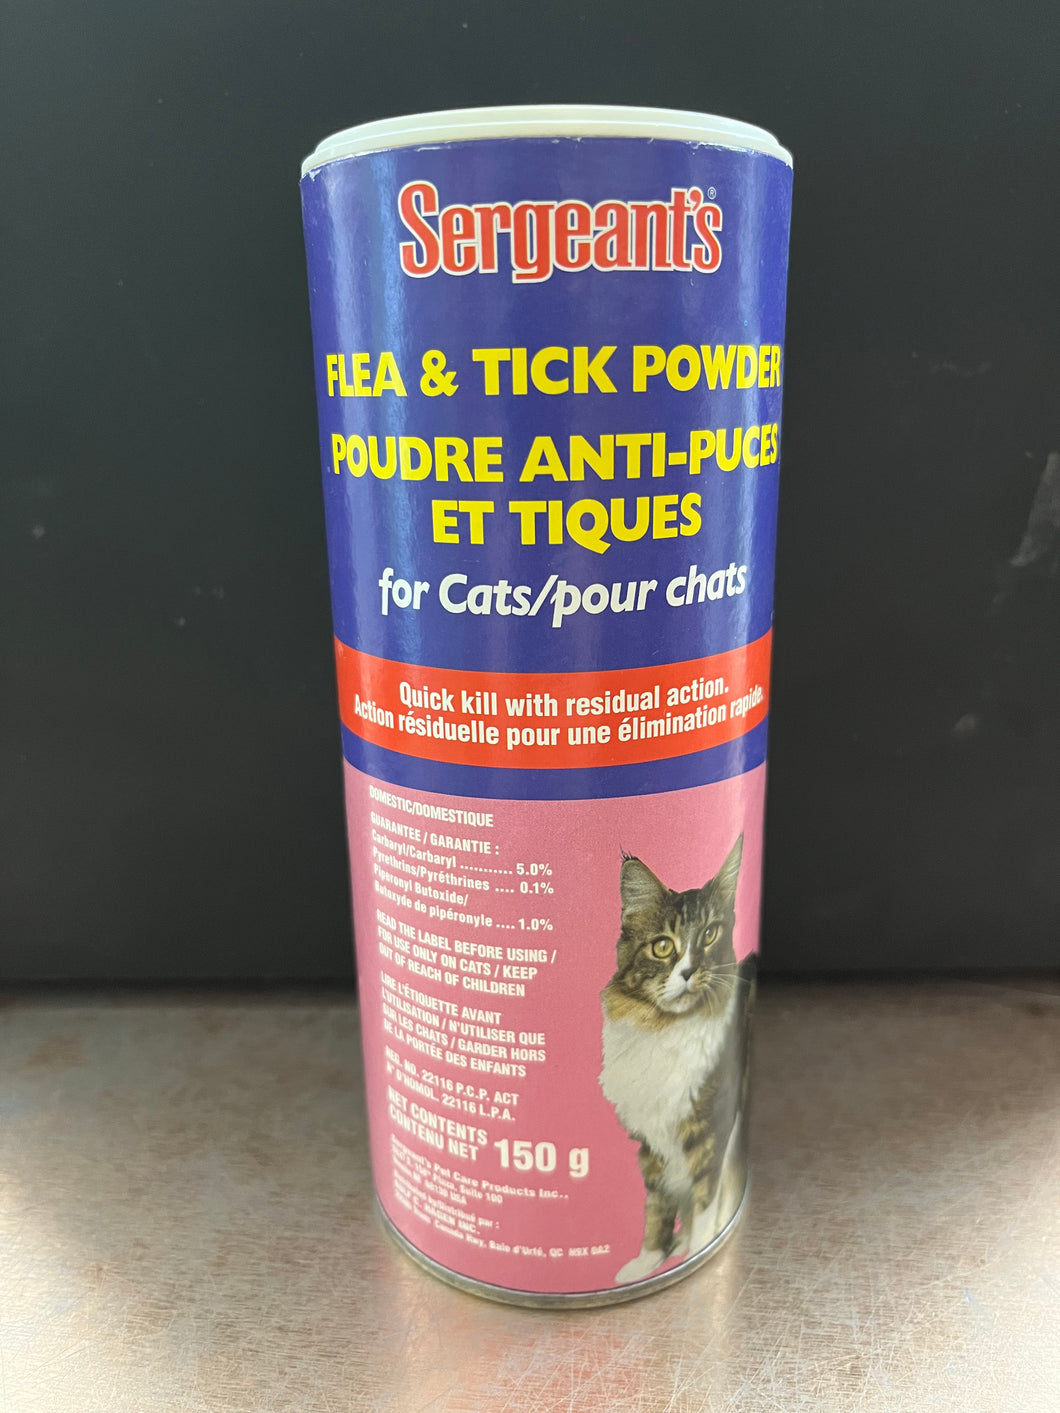 Sergeant’s Flea and Tick Powder for Cats